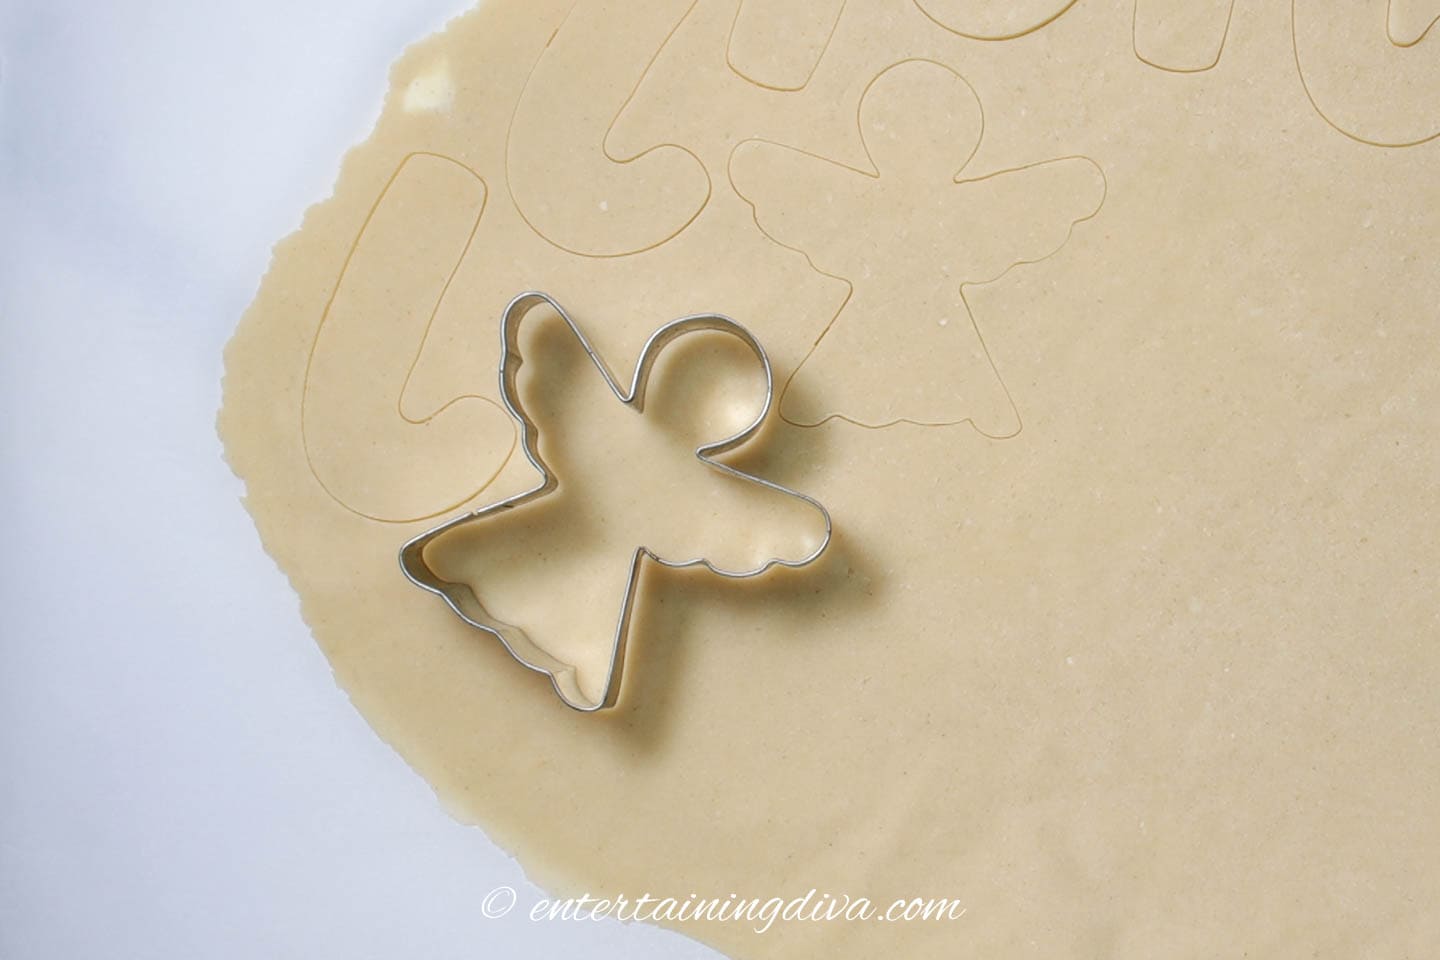 Angel cookie cutter on rolled sugar cookie dough